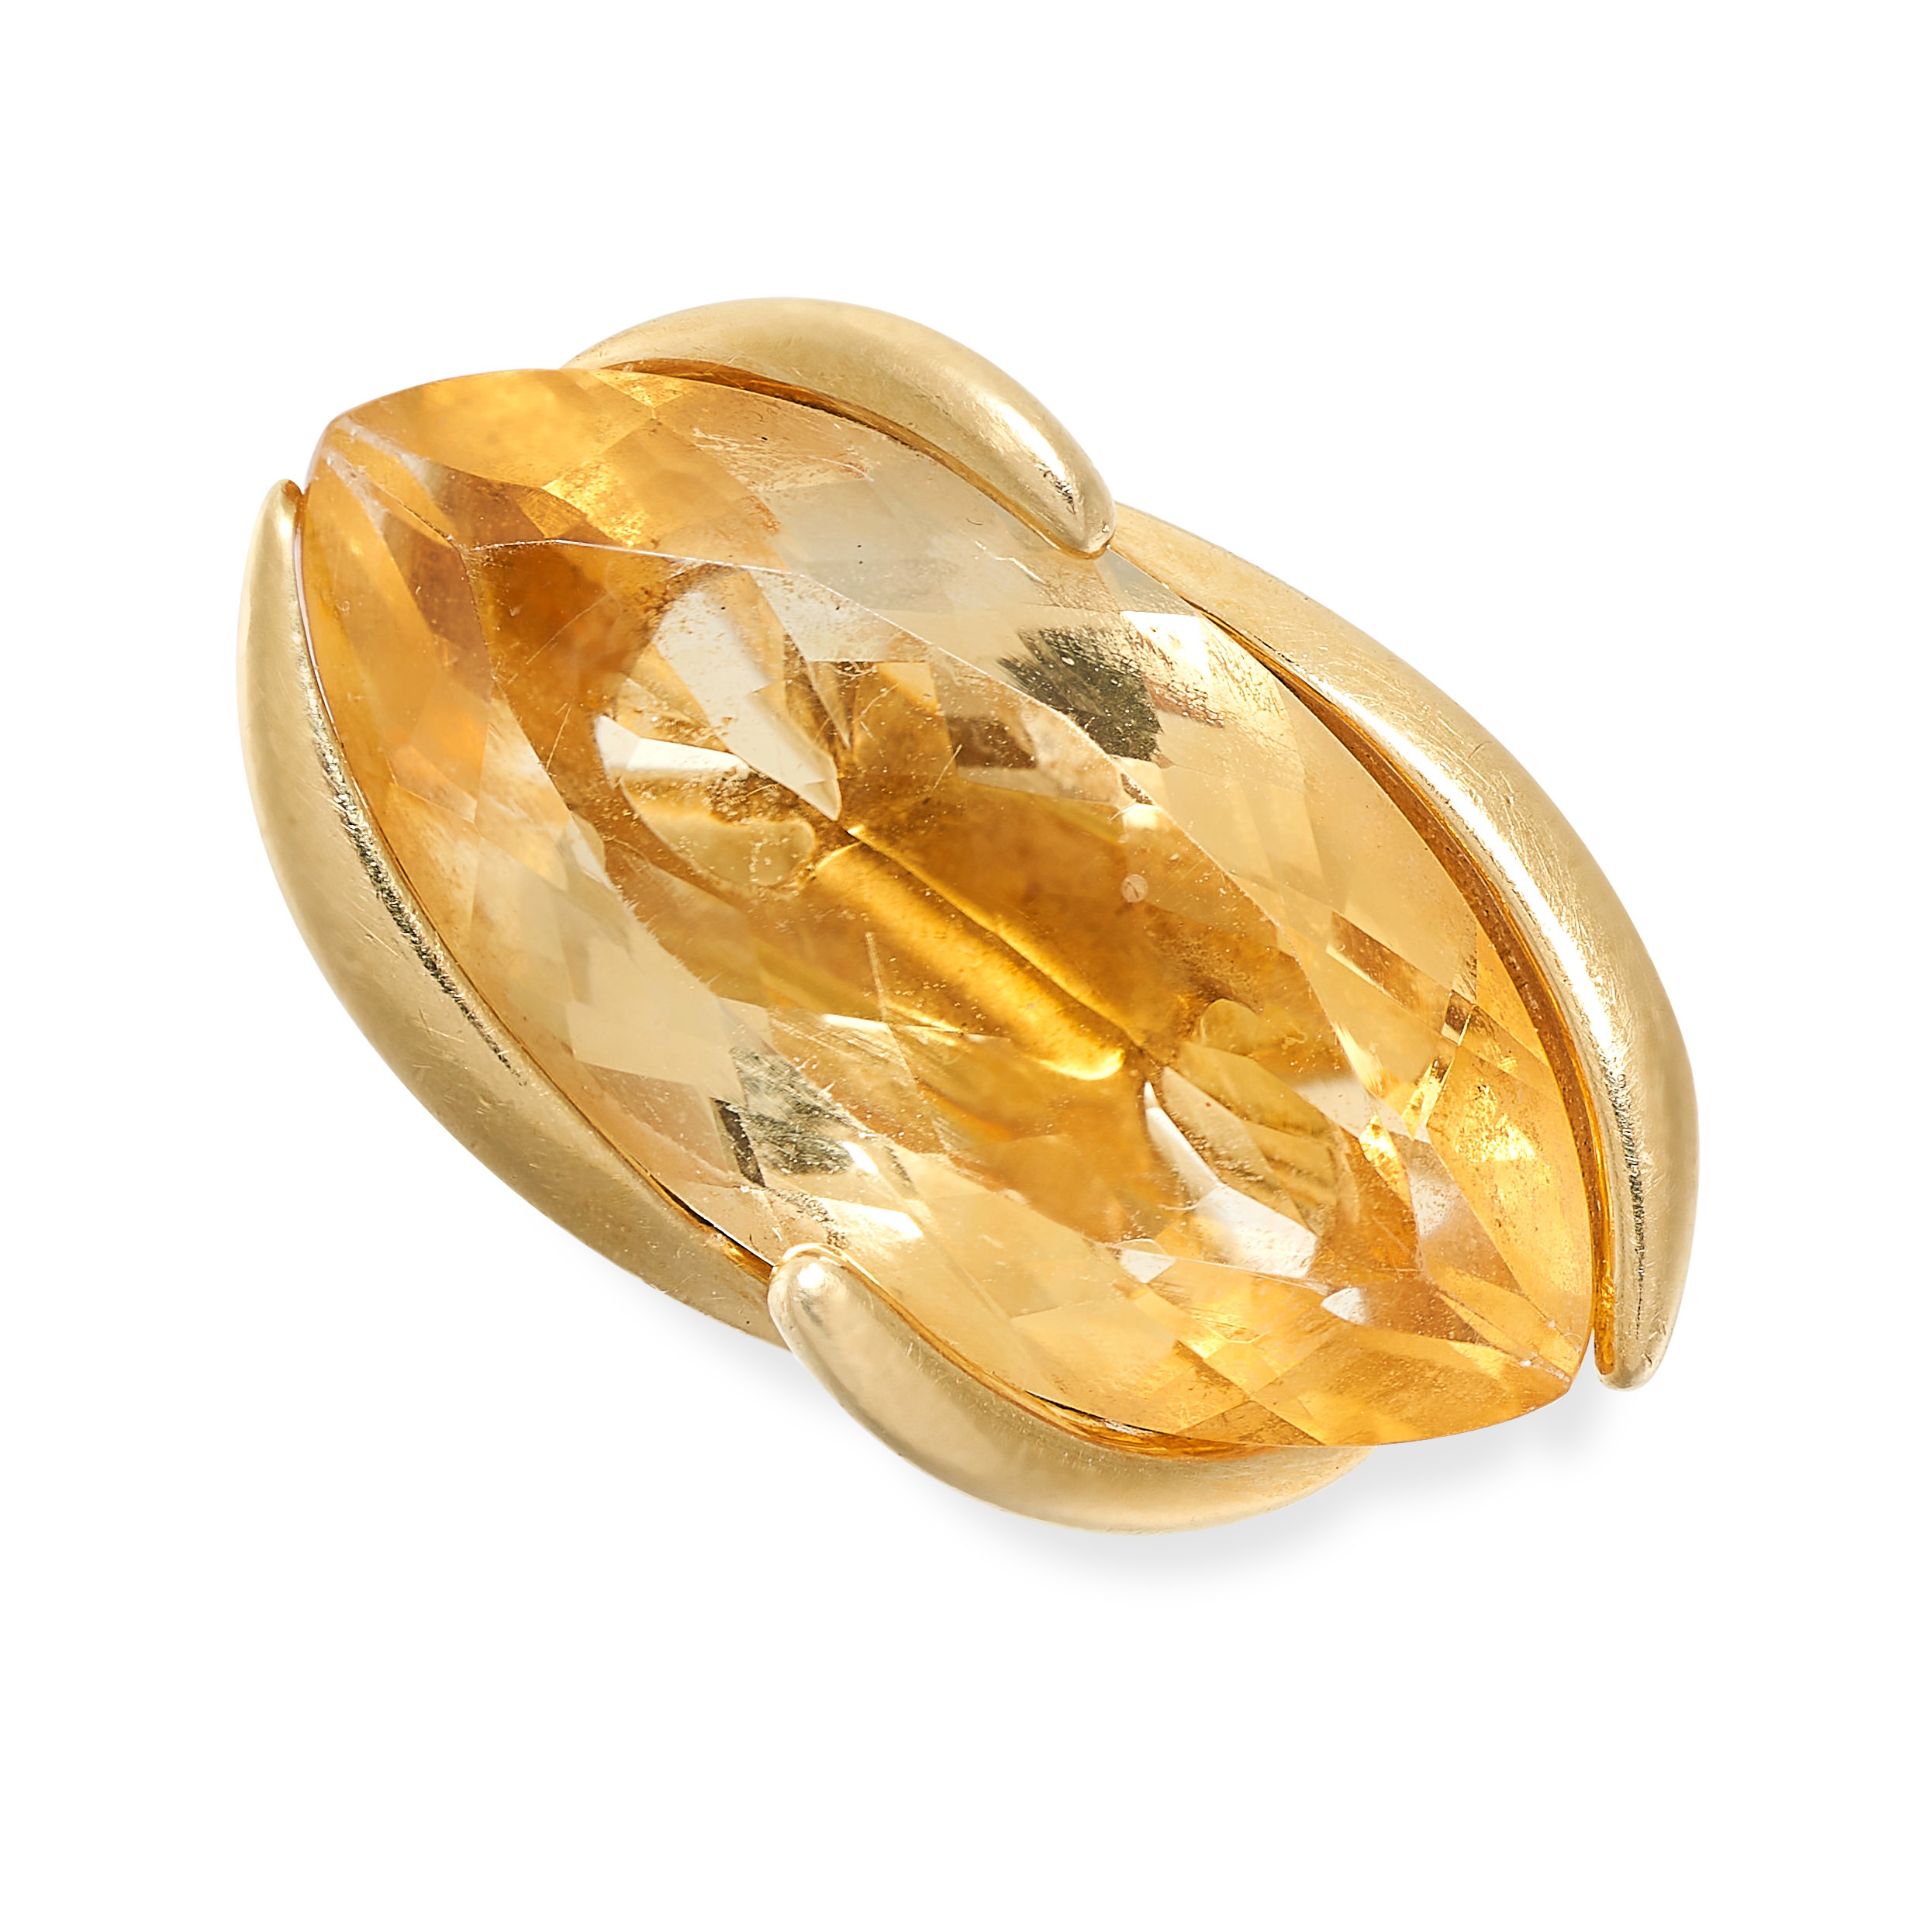 NO RESERVE - A FRENCH CITRINE RING in 18ct yellow gold, set with a marquise cut citrine, French a...